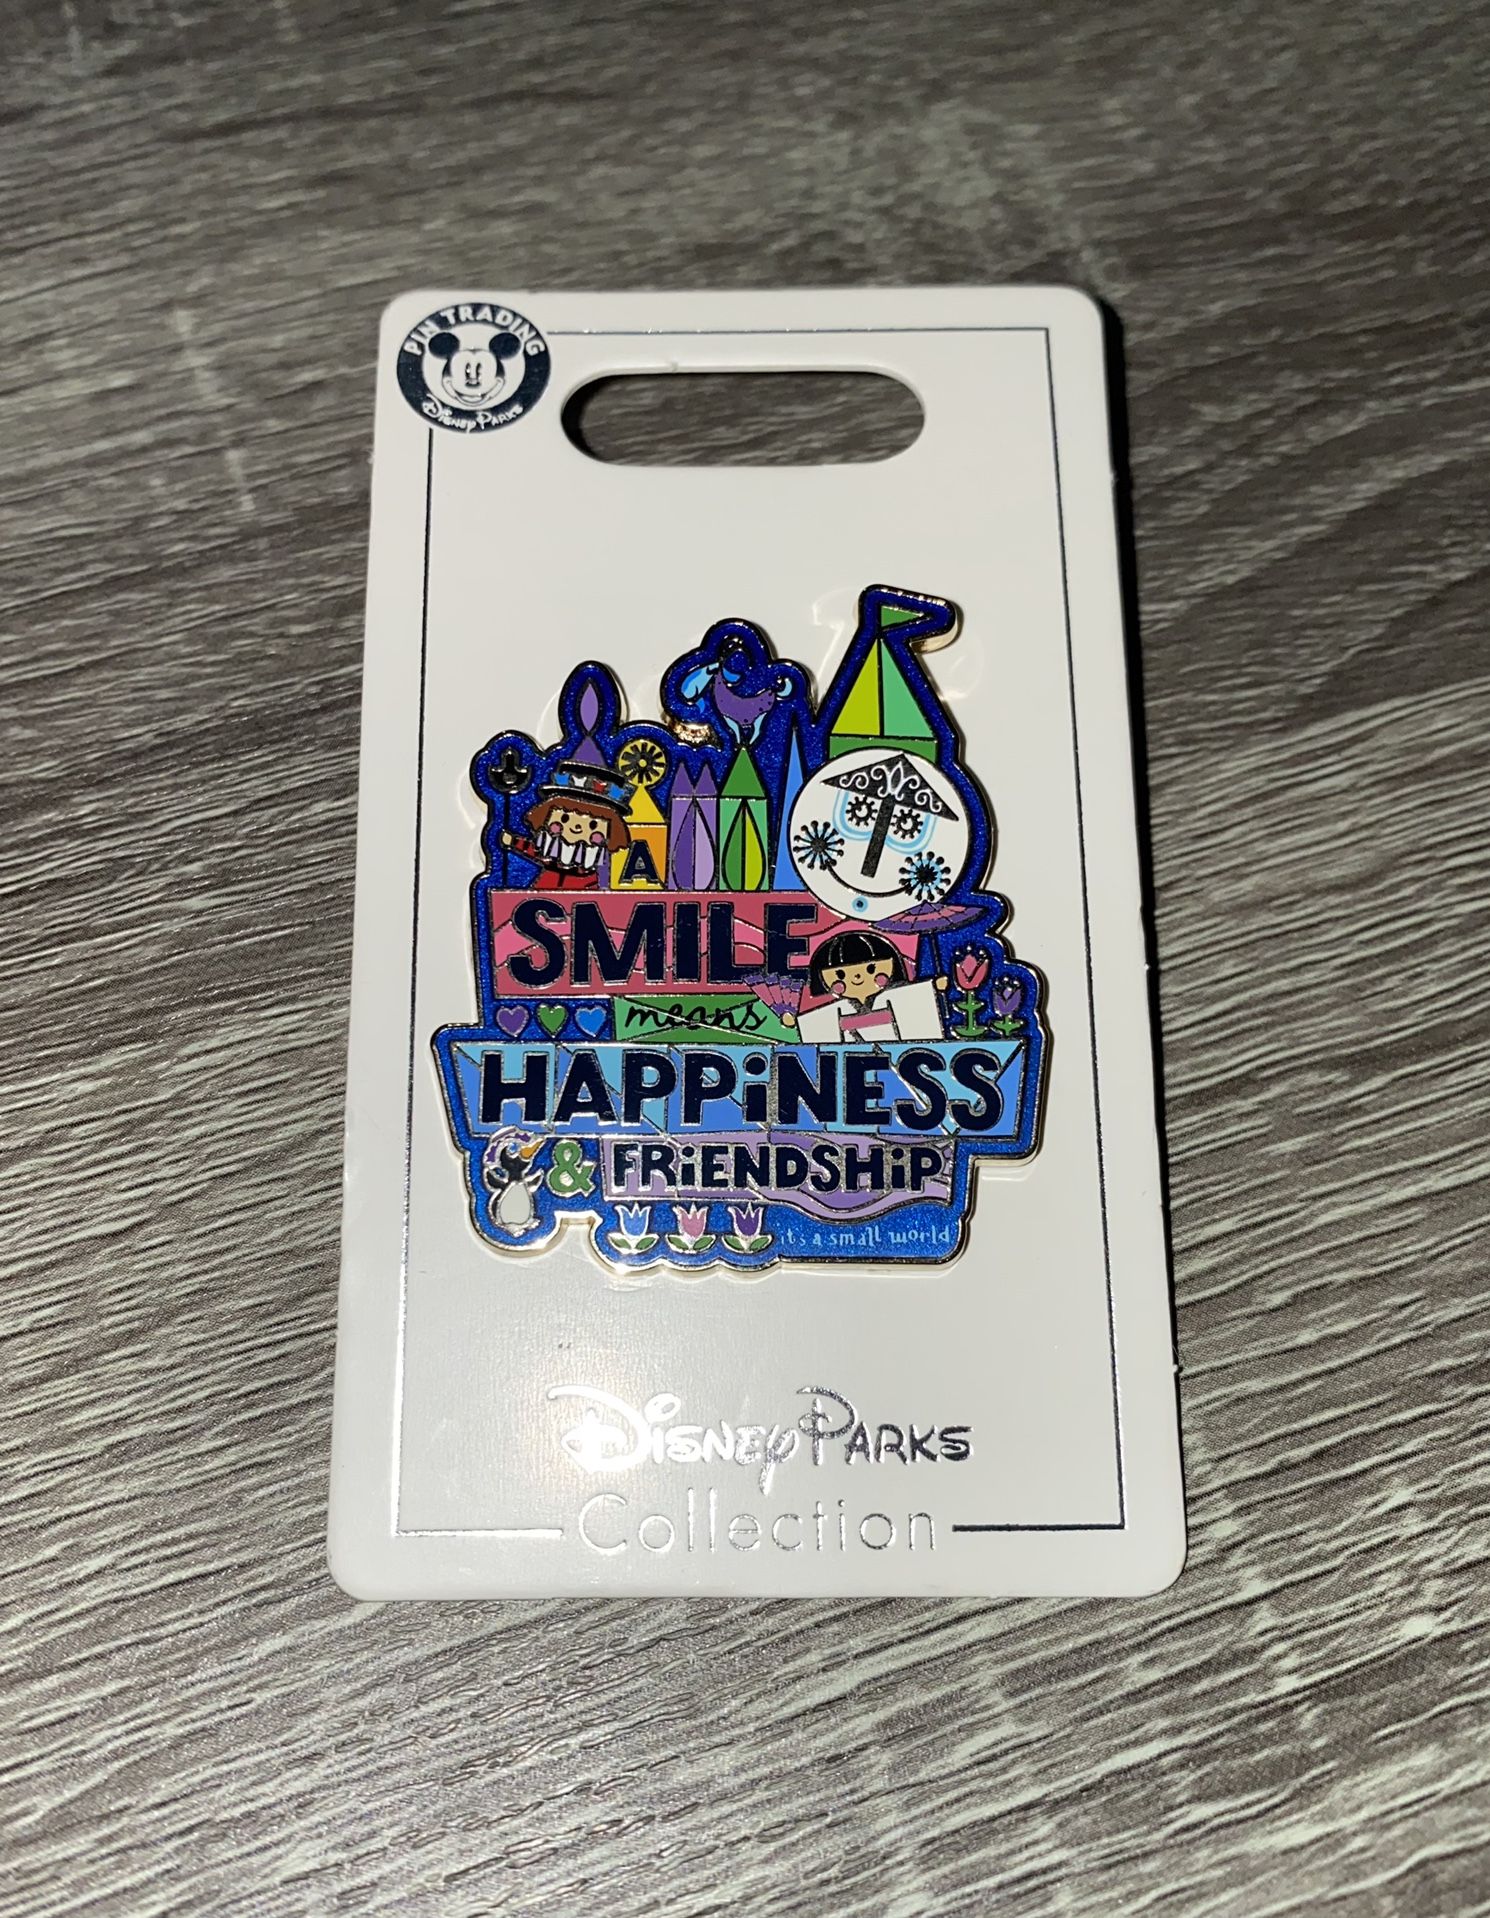 New Disney Pin Its A Small World SMILE HAPPINESS FRIENDSHIP